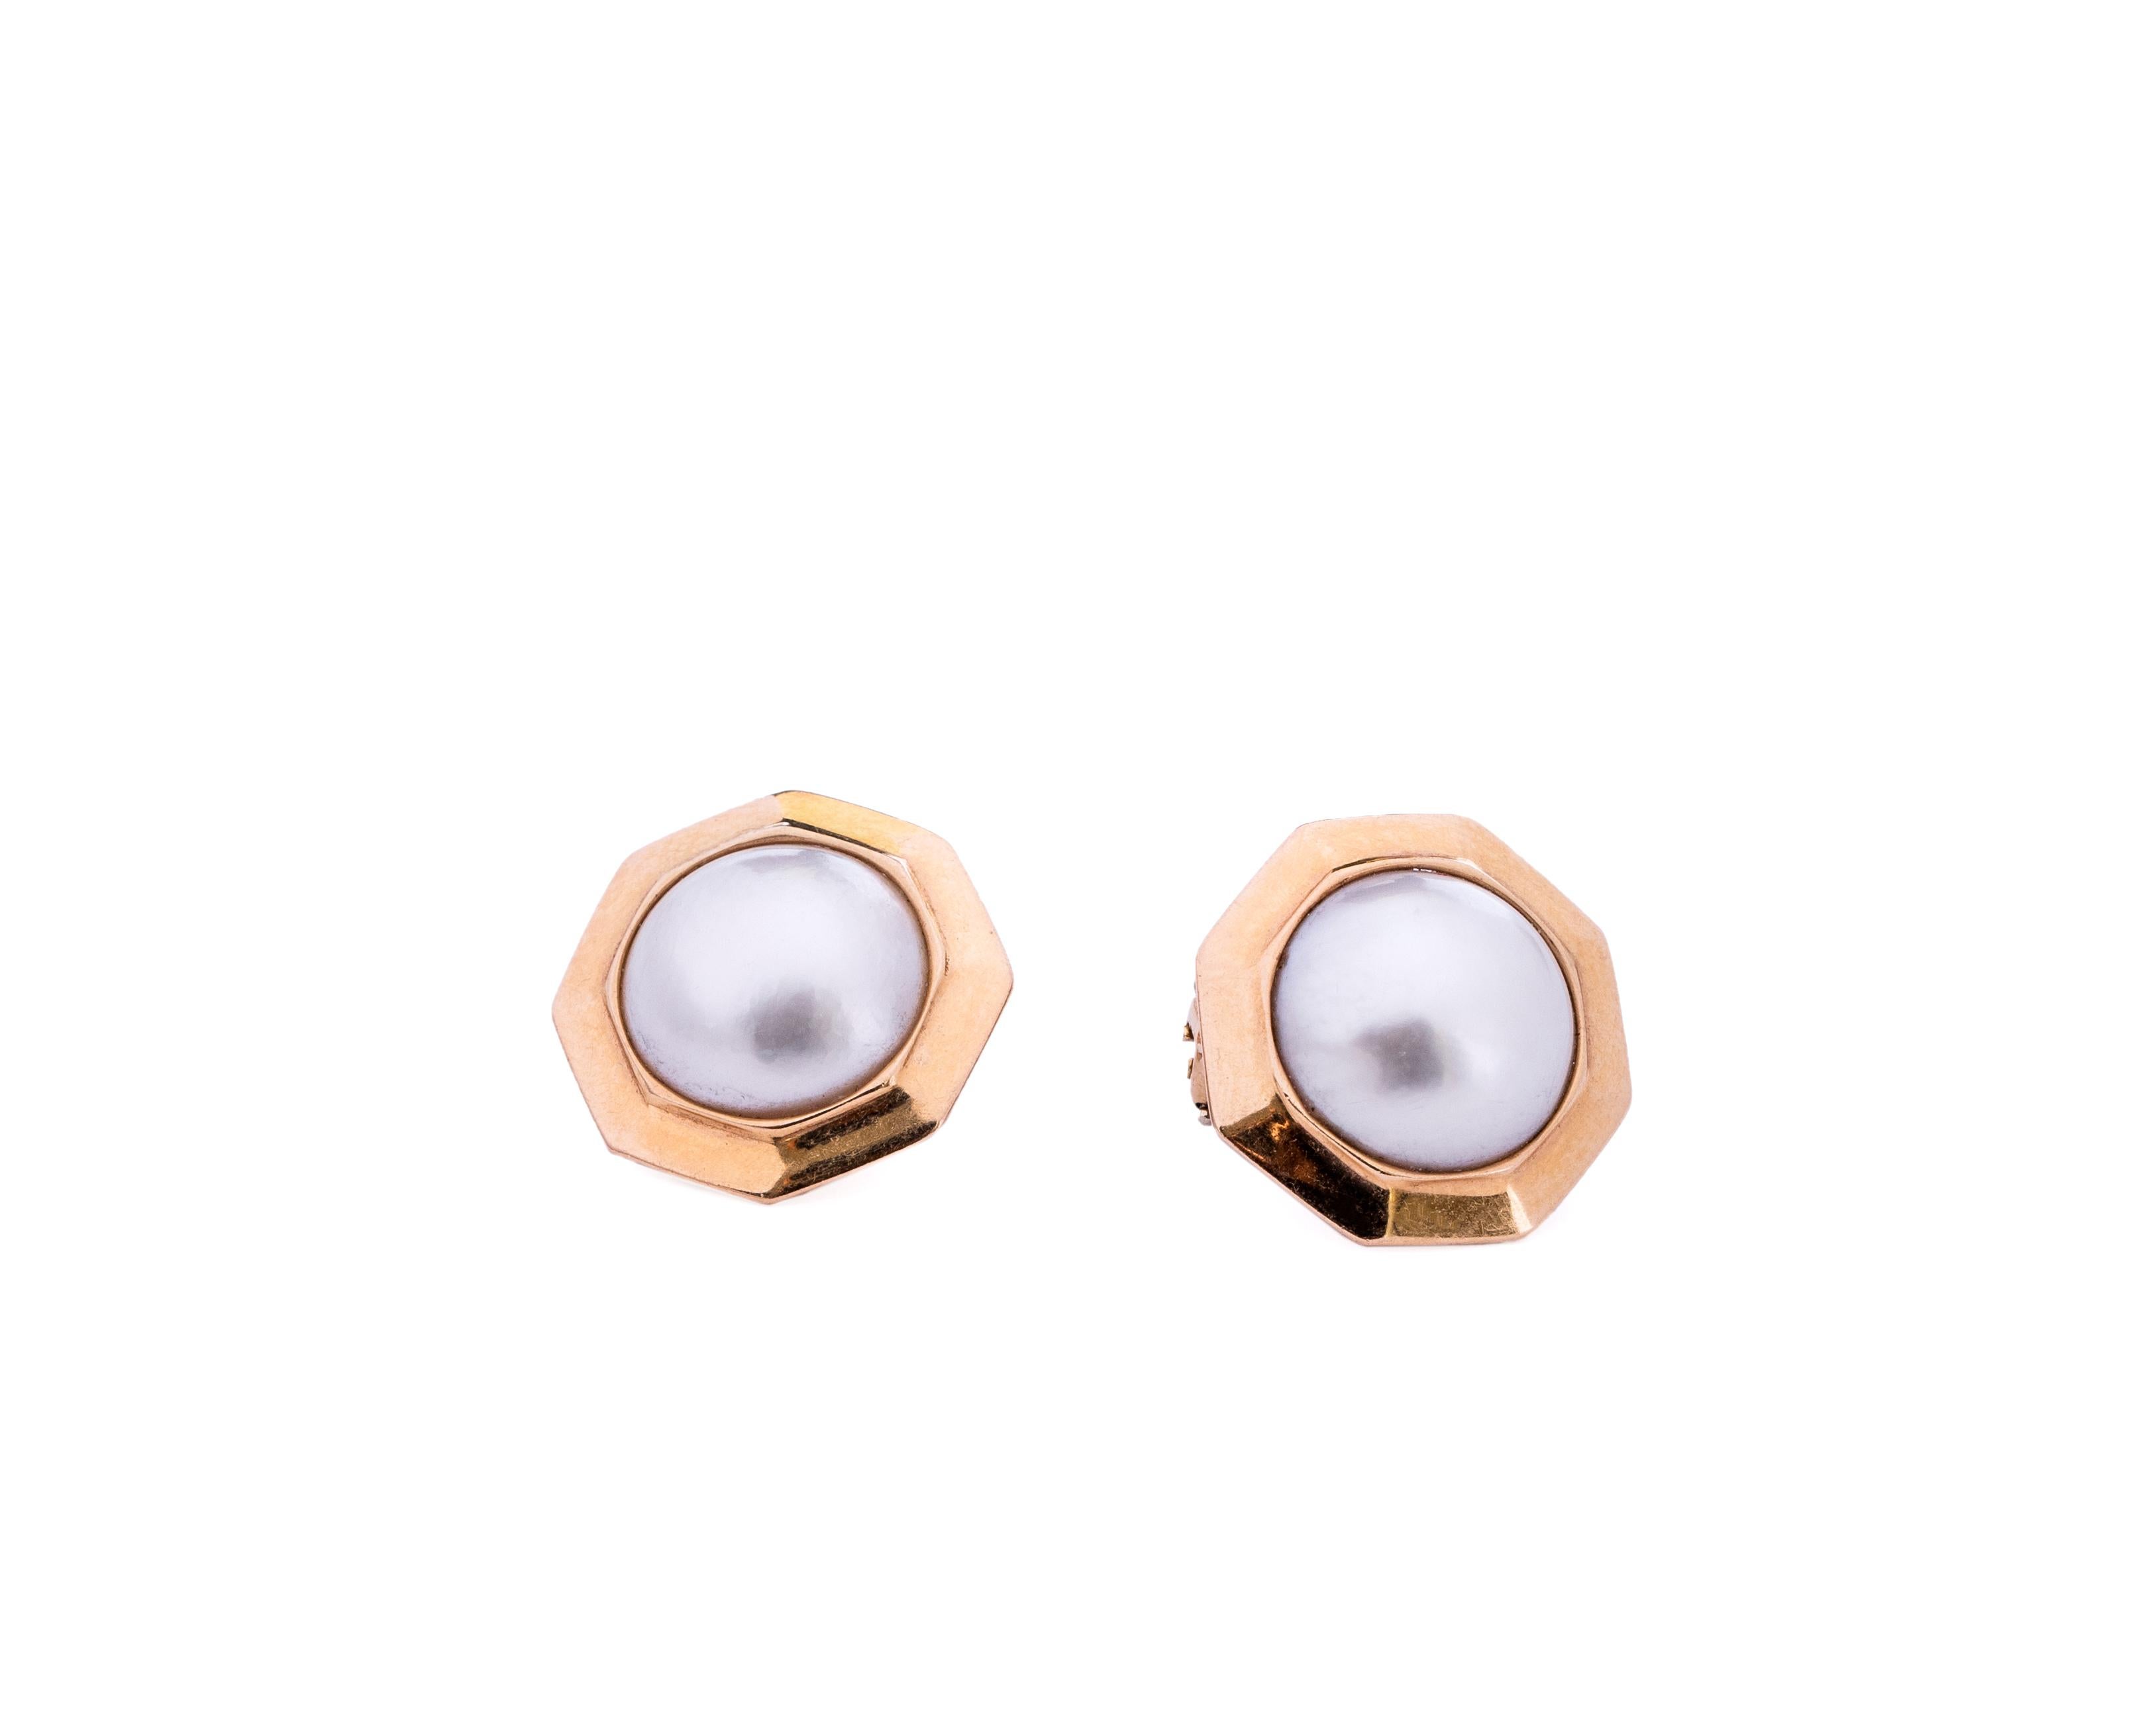 Item Detail:
Metal Type: 14 Karat Yellow Gold
Measurement: 1 Inch Diameter 
Weight: 10.6 grams

Pearl Details:
15 Millimeter Measurement (each)
Mabe Pearl

Beautiful, retro vintage design from the 1970s. Crafted in 14 Karat Yellow Gold octagonal